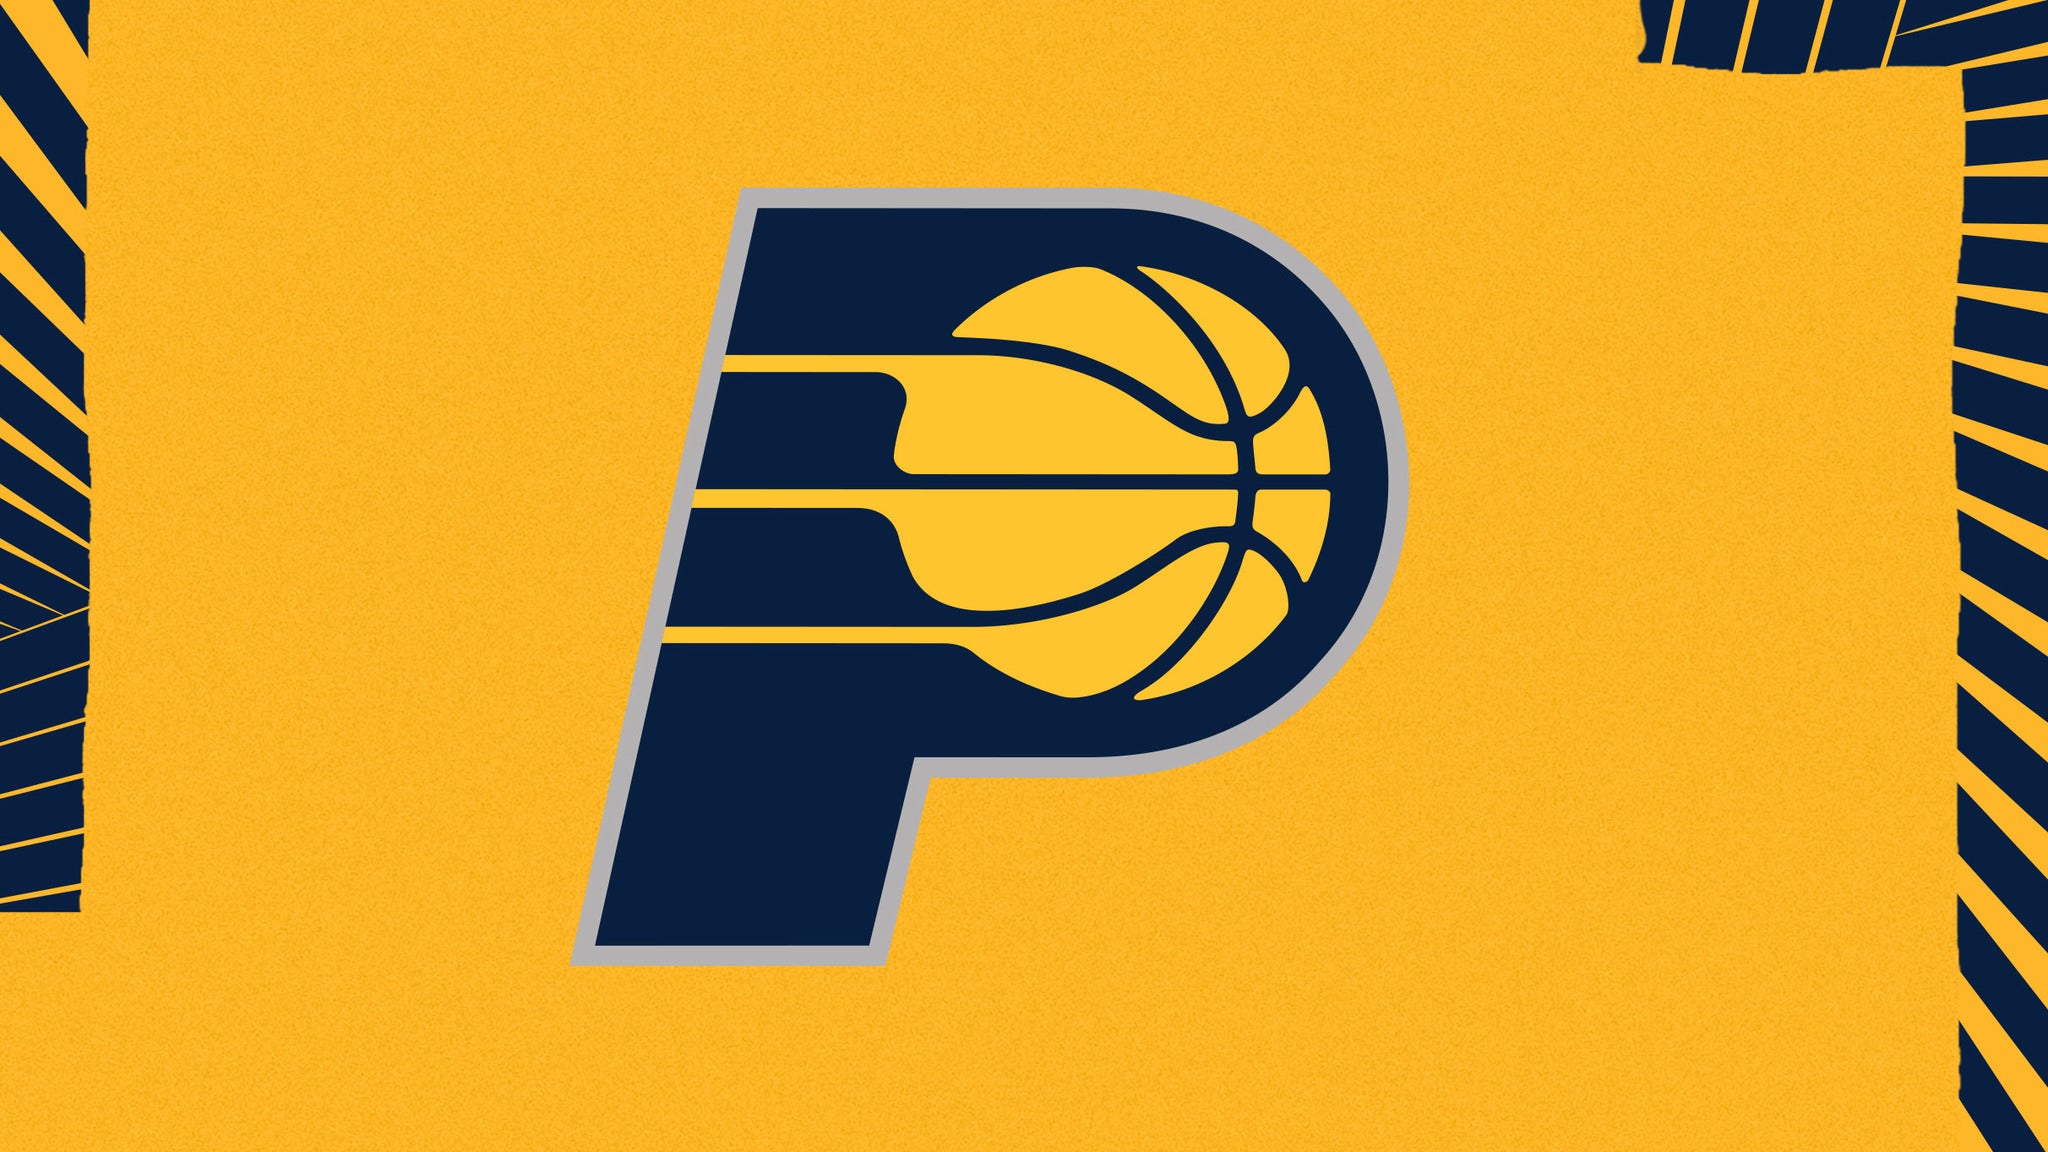 Indiana Pacers v. New York Knicks